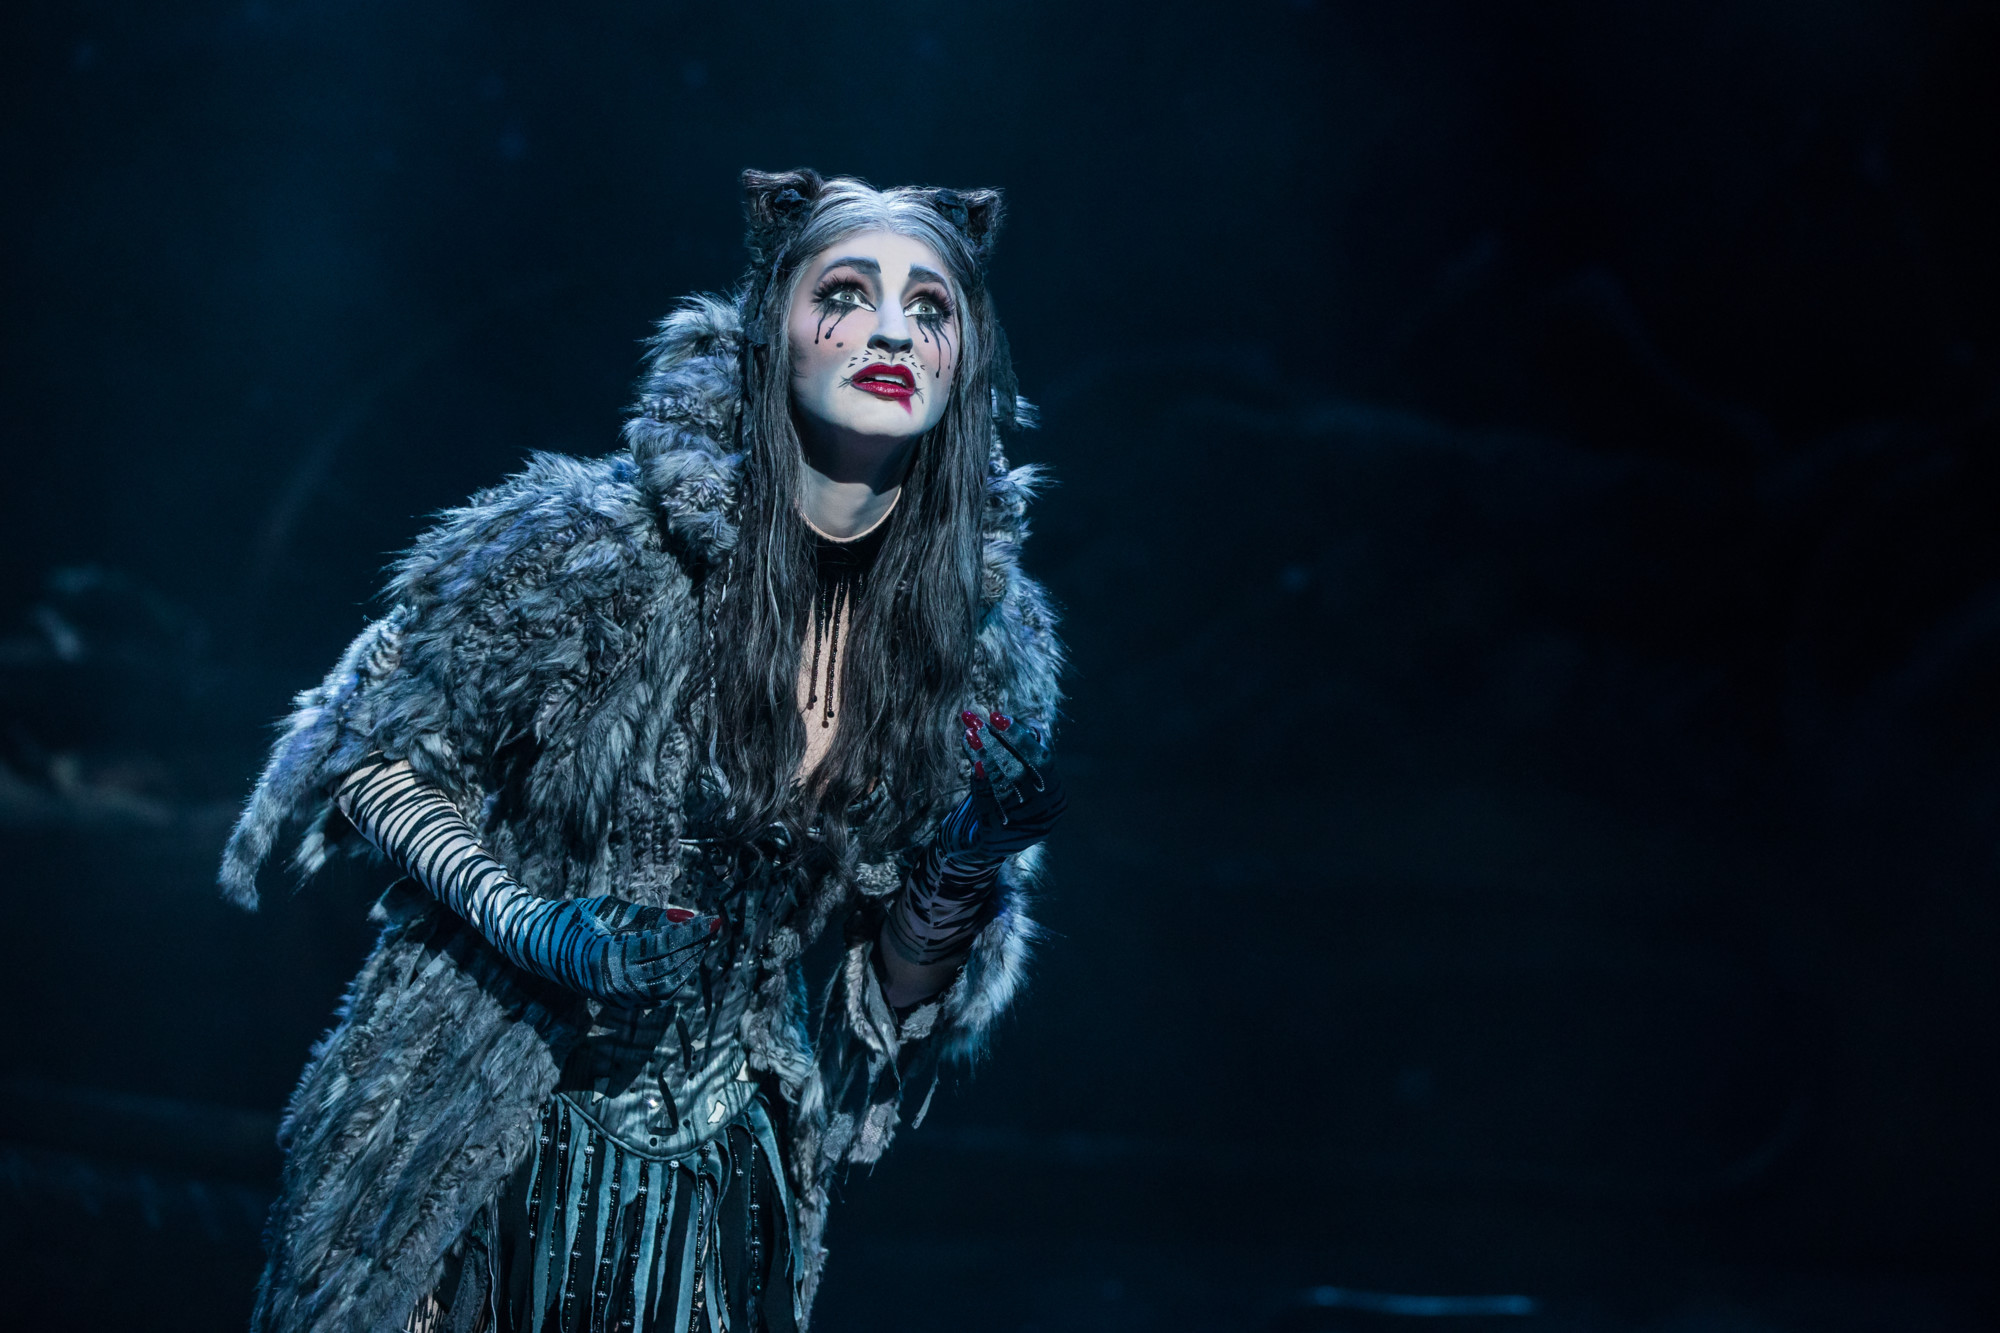 If you've had them, you know that cats can be very guilt-inducing when they desire attention, as Grizabella does here in 'Cats.' (photo: Matthew Murphy)